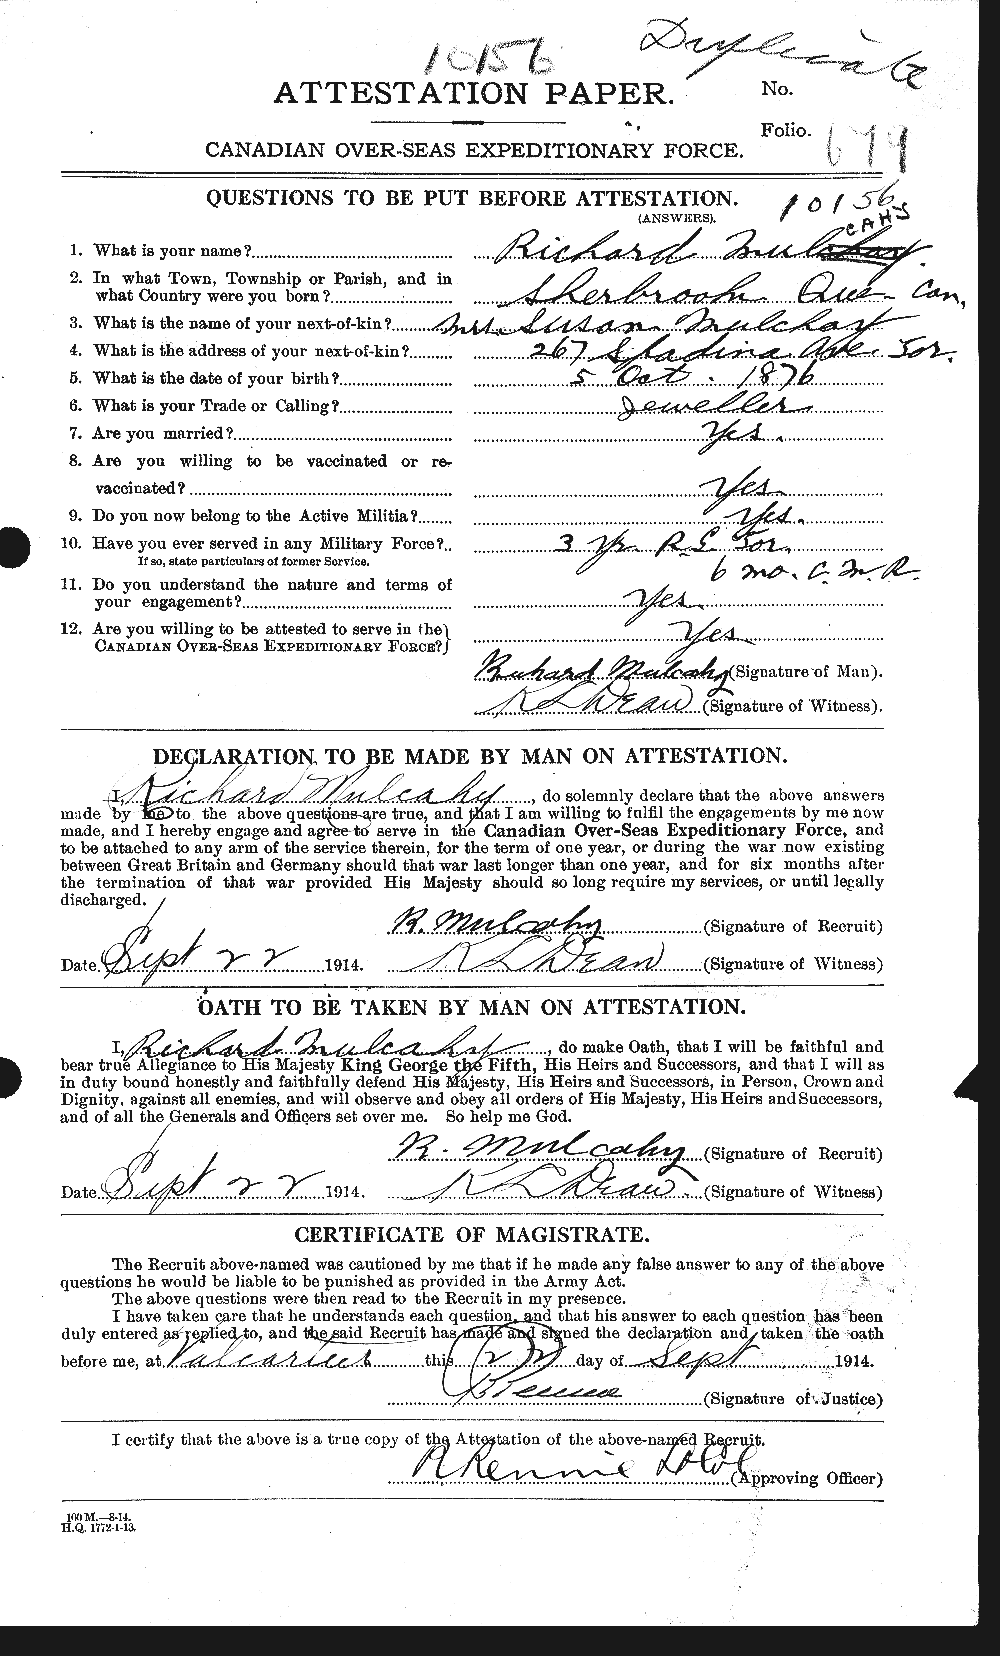 Personnel Records of the First World War - CEF 511449a